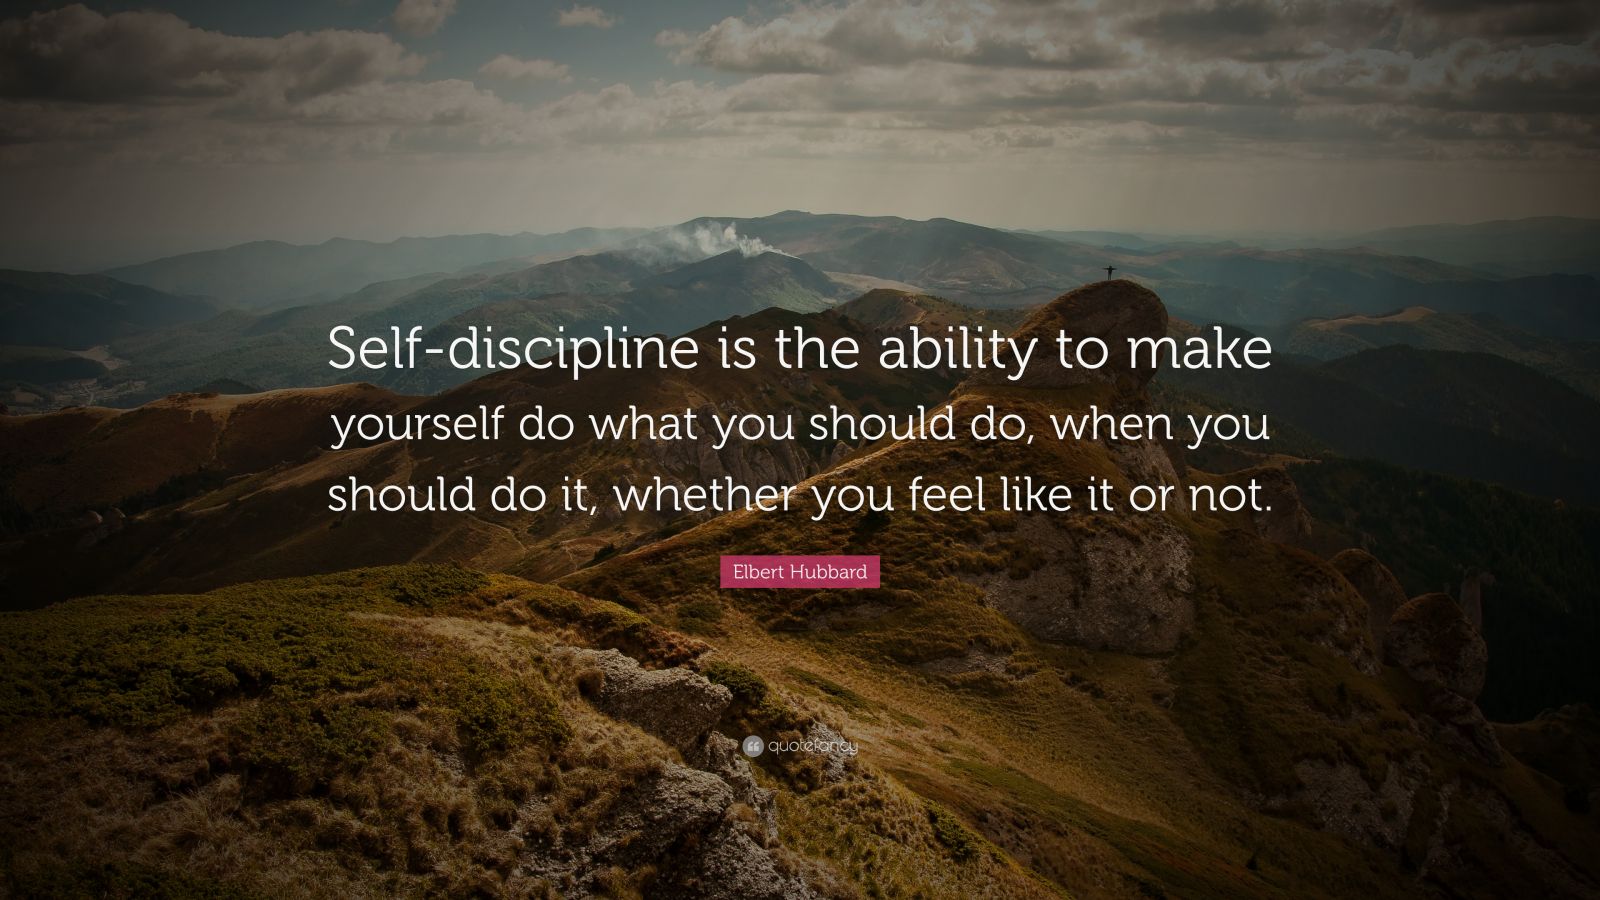 Elbert Hubbard Quote: “Self-discipline is the ability to make yourself